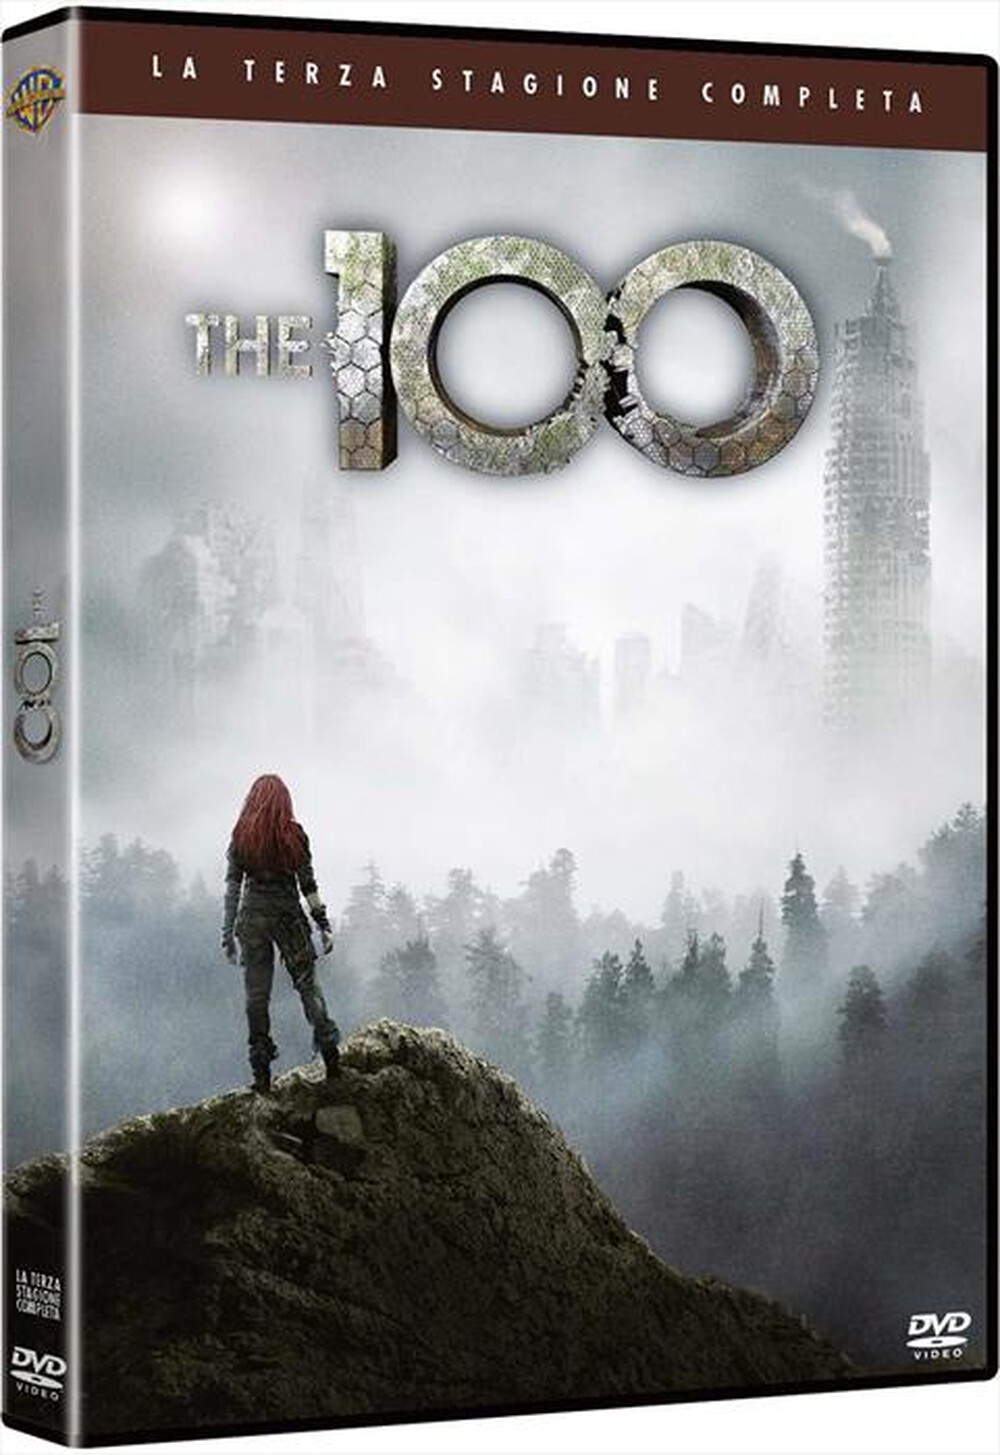 "WARNER HOME VIDEO - 100 (The) - Stagione 03 (4 Dvd)"